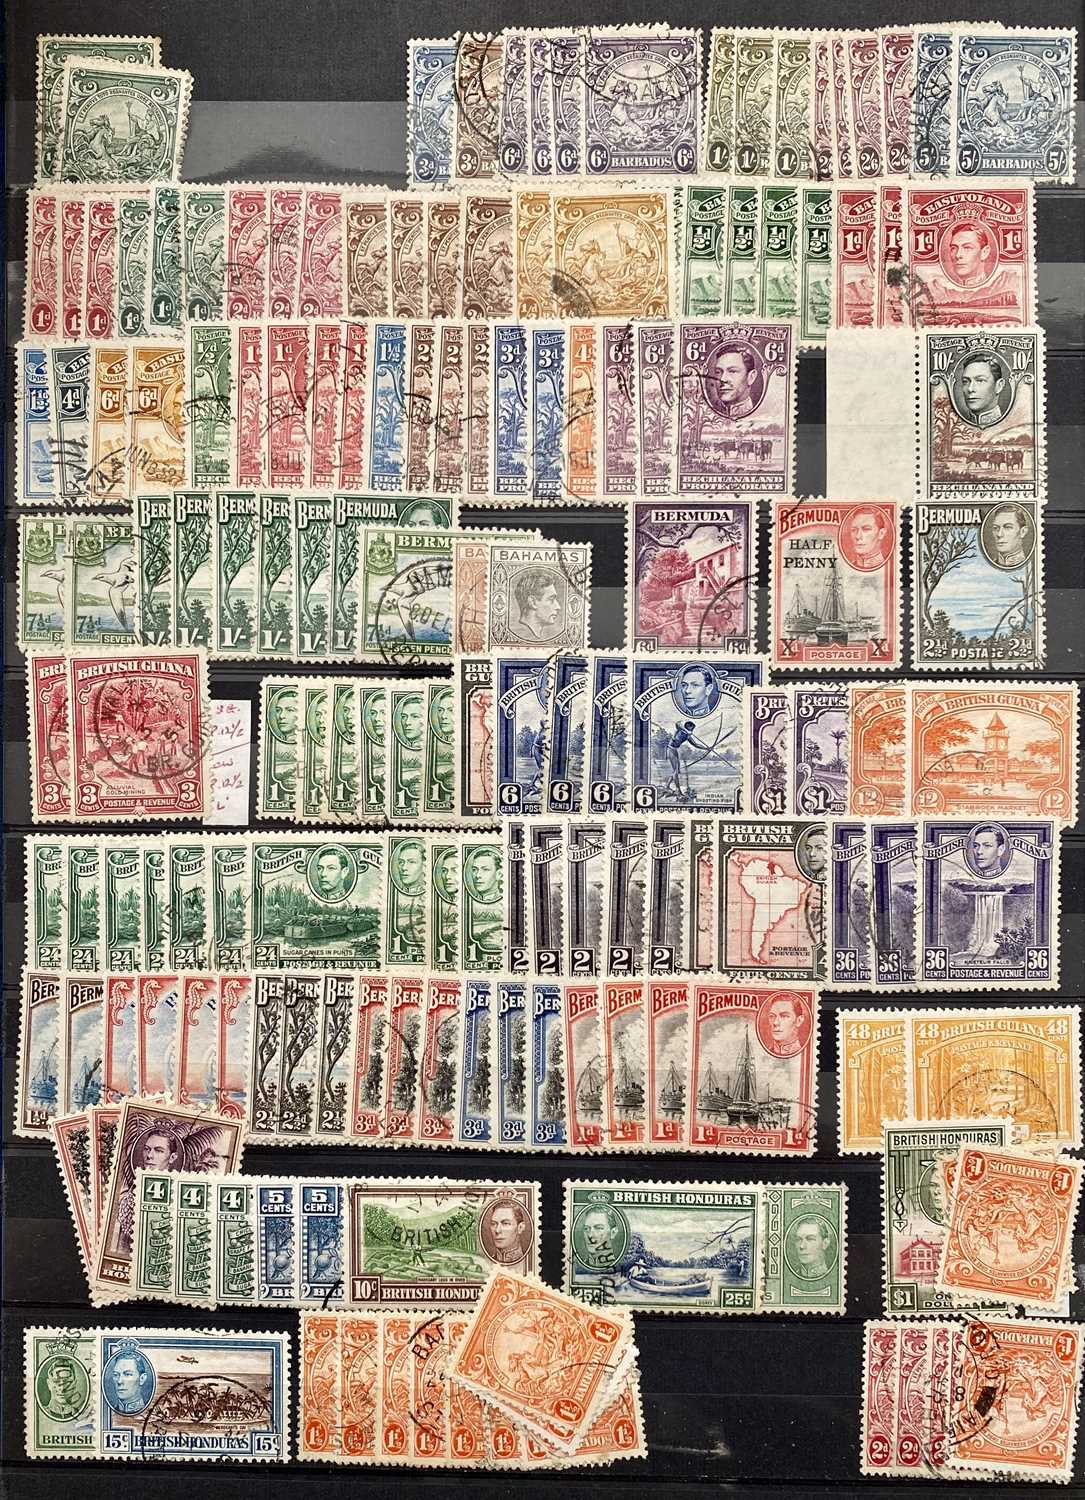 COMMONWEALTH GV1 - fine used collection of many countries, full sets and top values, good quality - Image 7 of 17